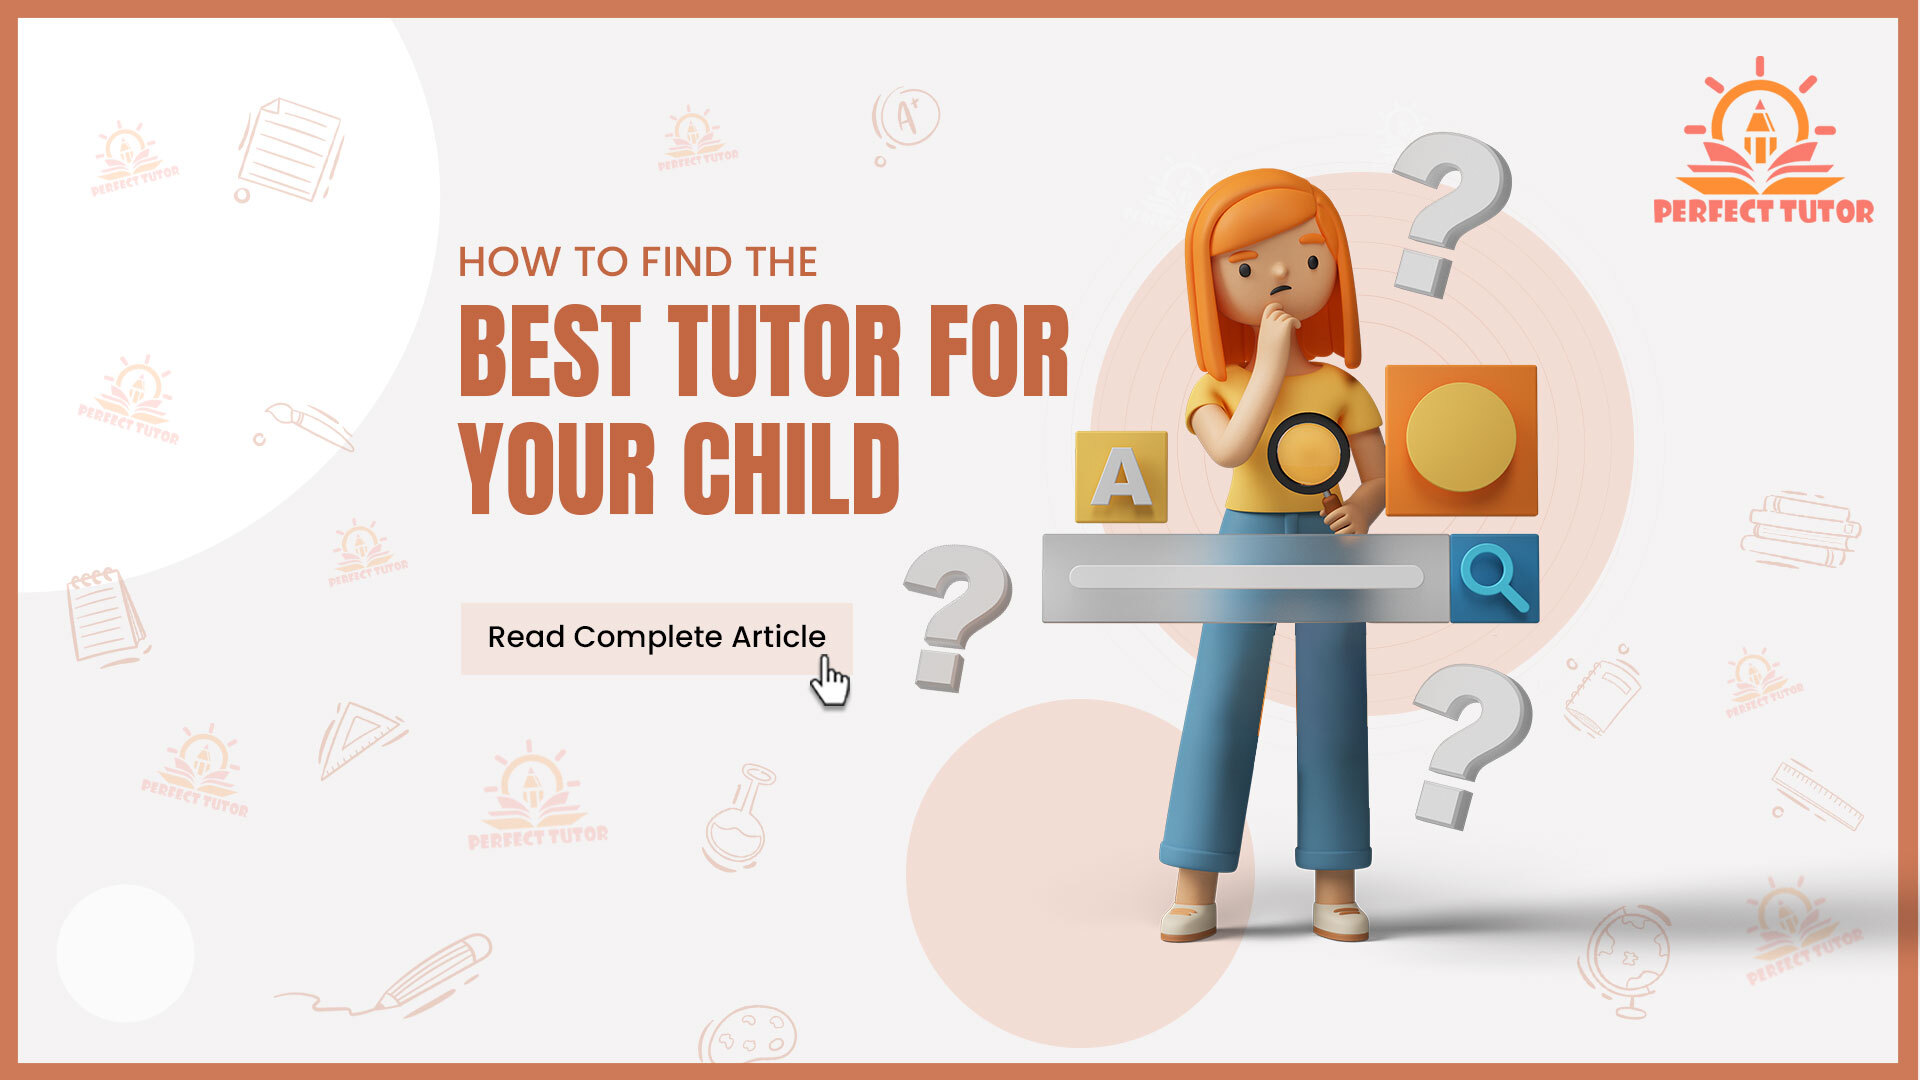 How to find the best tutor for your child